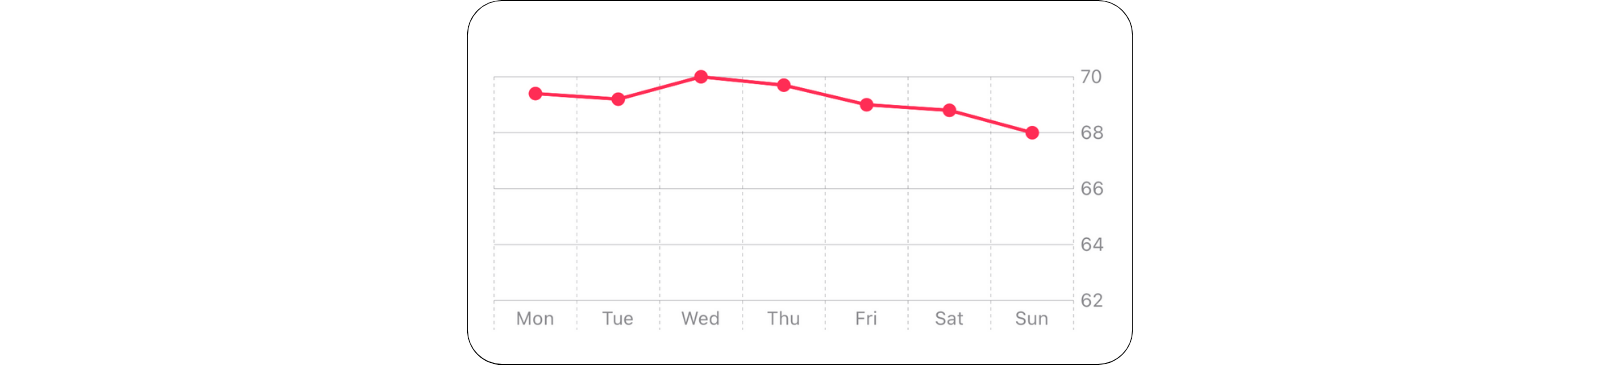 Line Chart showing weight data on the y-axis with custom scale and days of the week on the x-axis